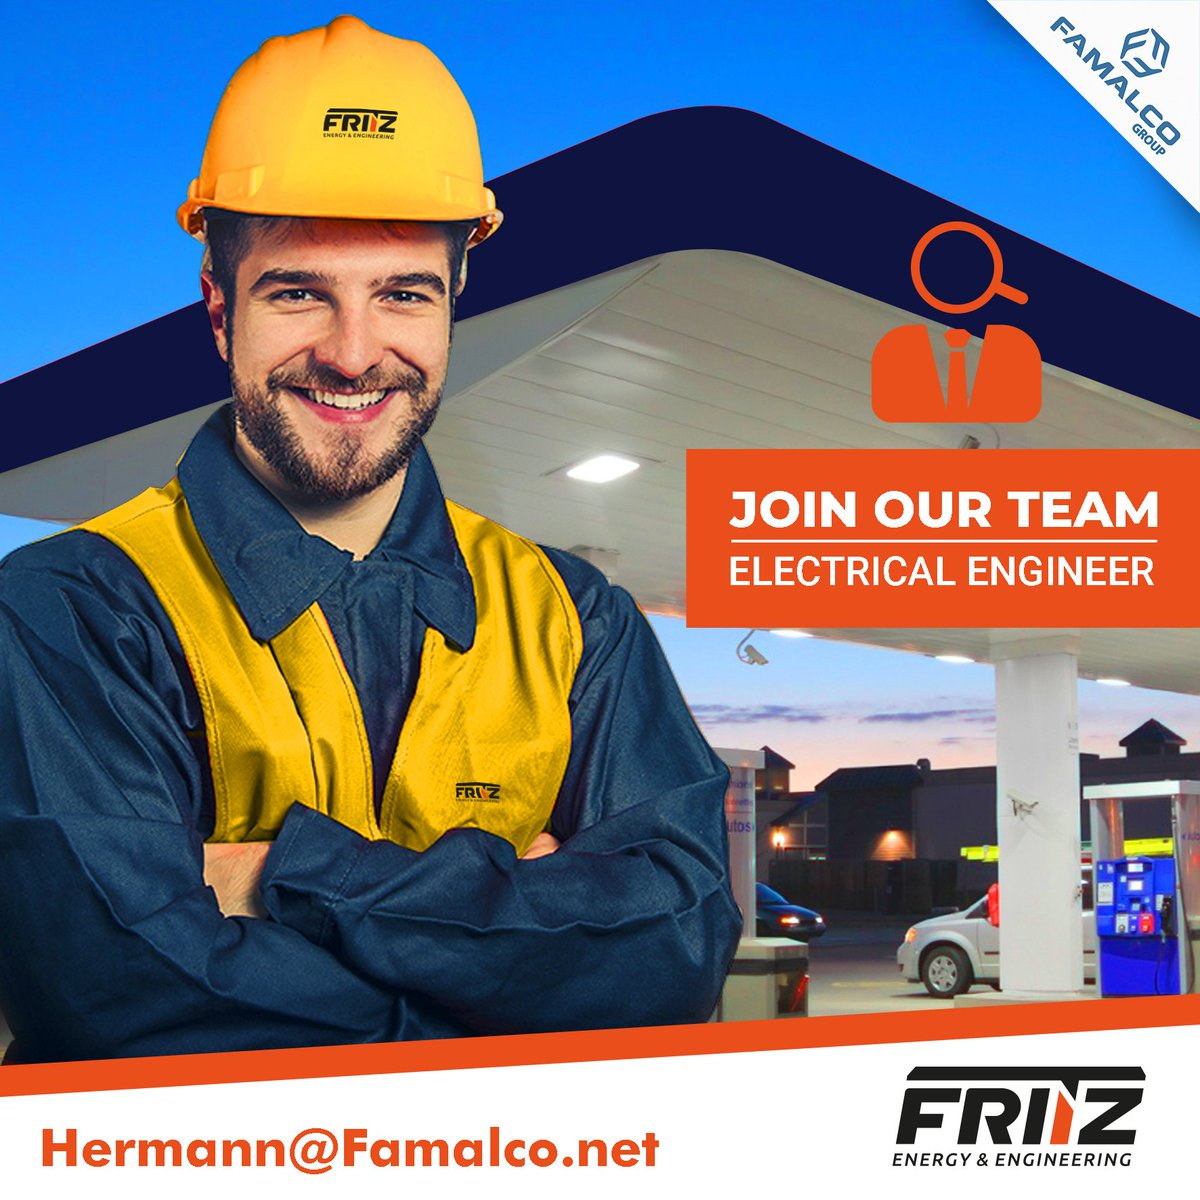 📢 #ElectricalEngineer 📢
We’re looking for an Electrical Engineer to join our expanding team❗
If you think you’ve got what it takes, contact us on 📧 Hermann@famalco.net

#Famalco | #BuildingBusinesses

#Fritz #Vacancies #JobsinMalta #Malta